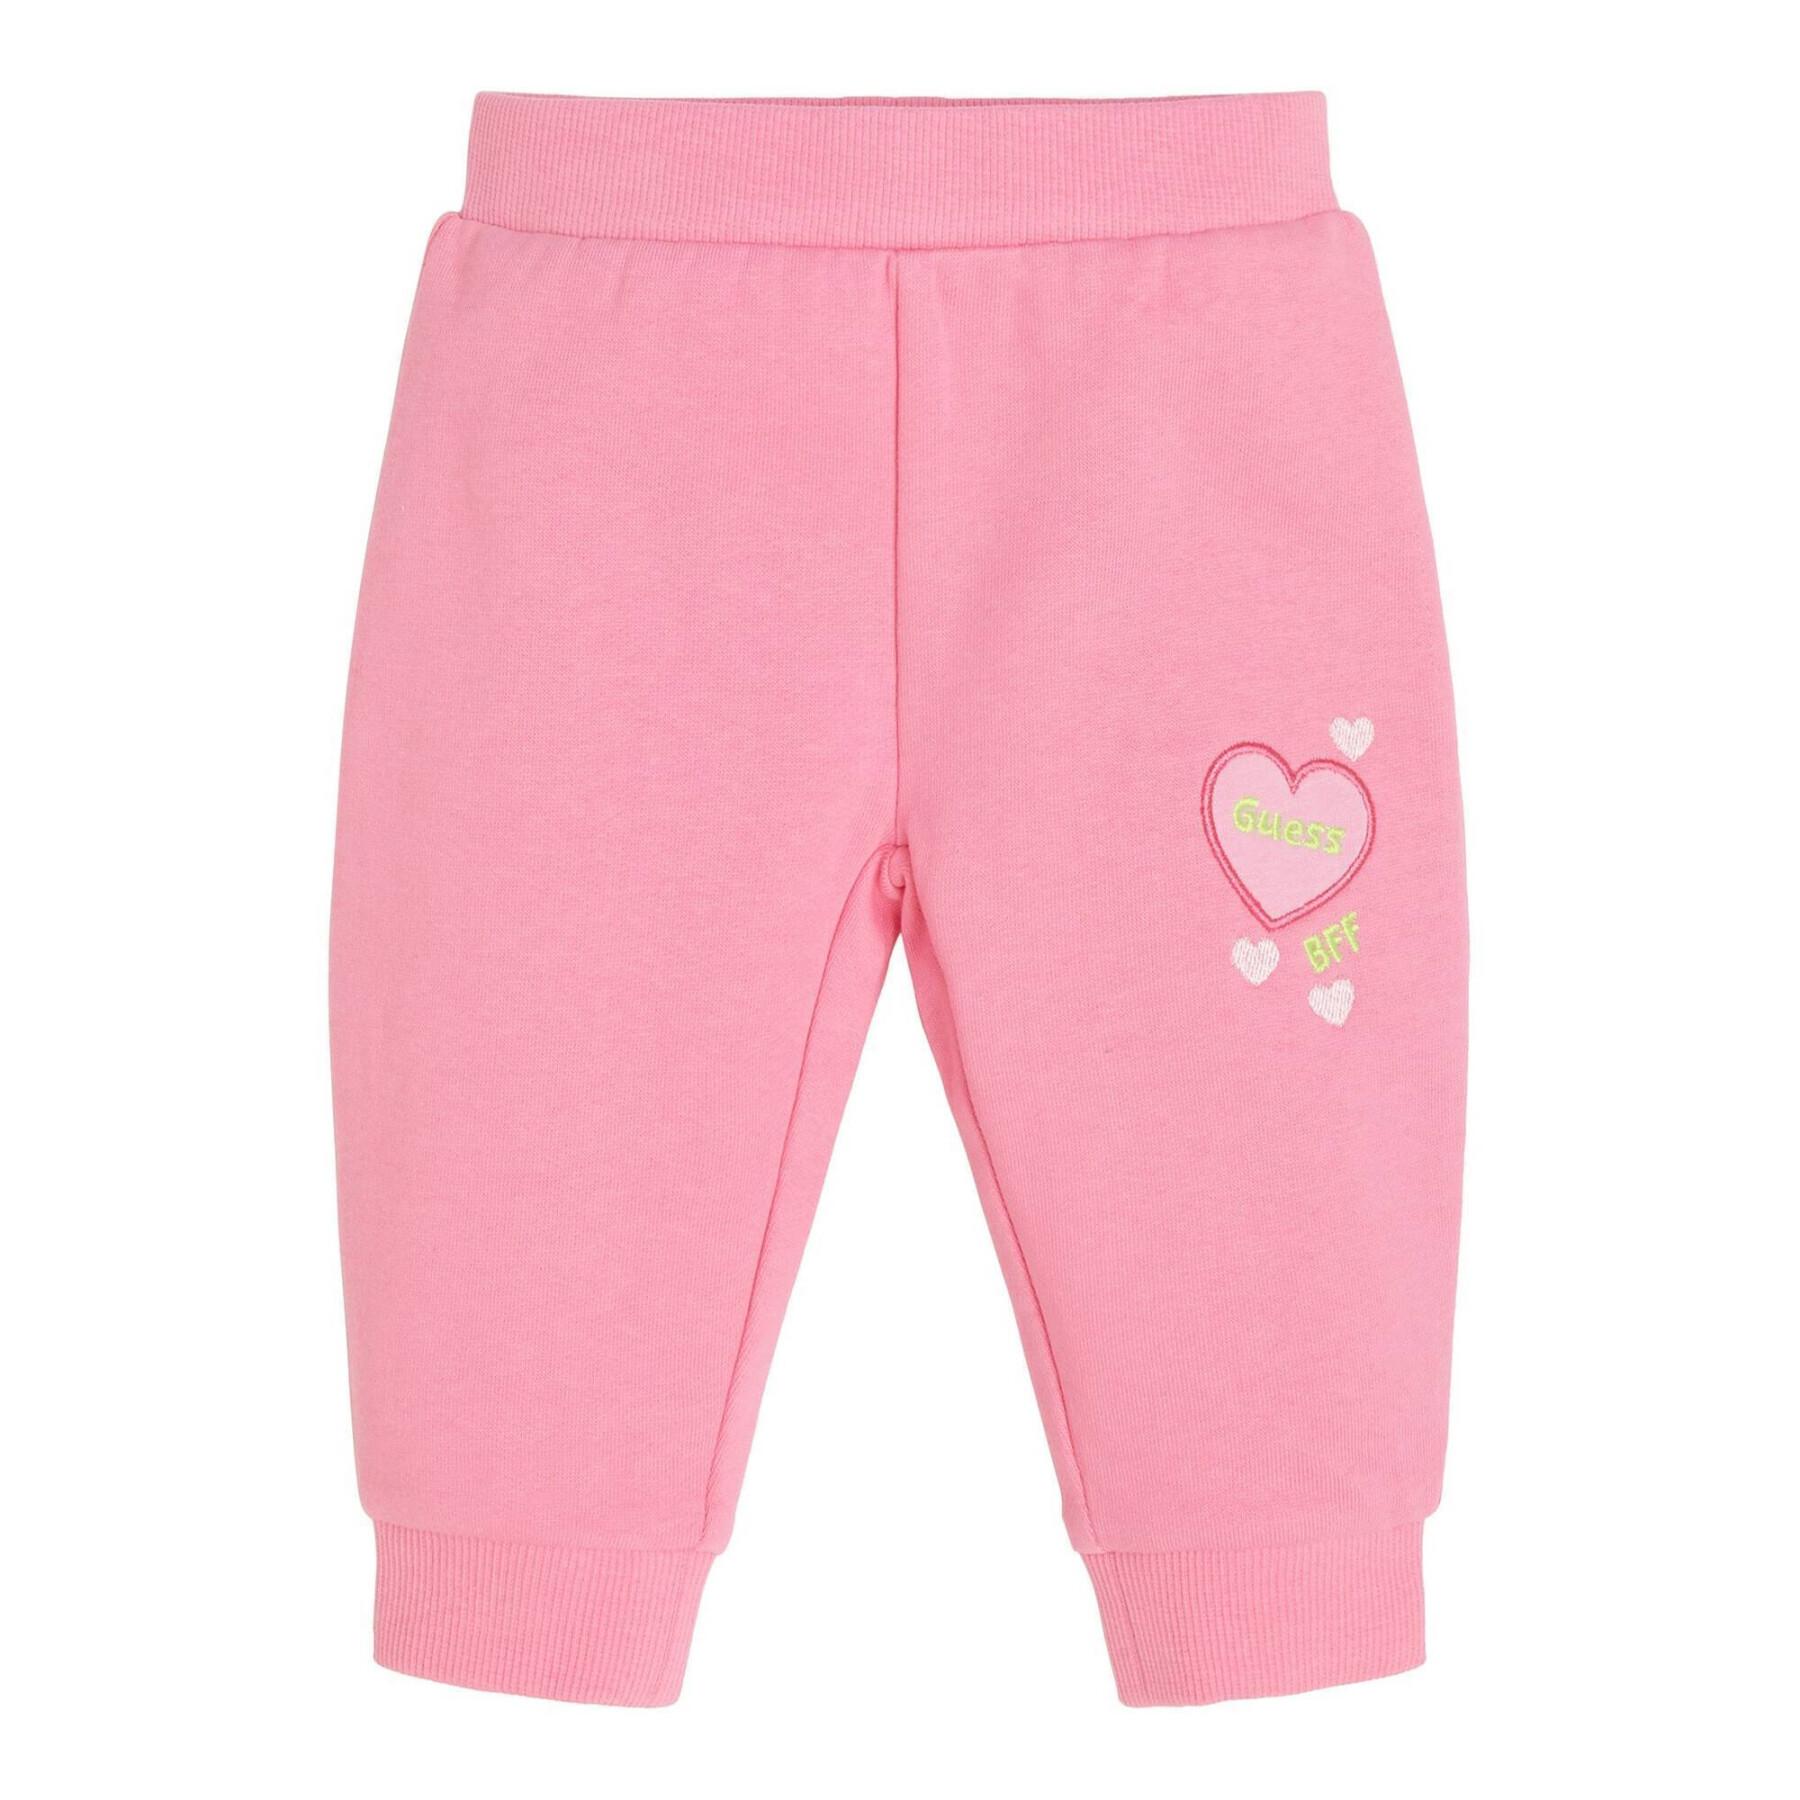 Baby girl jogging suit Guess Active